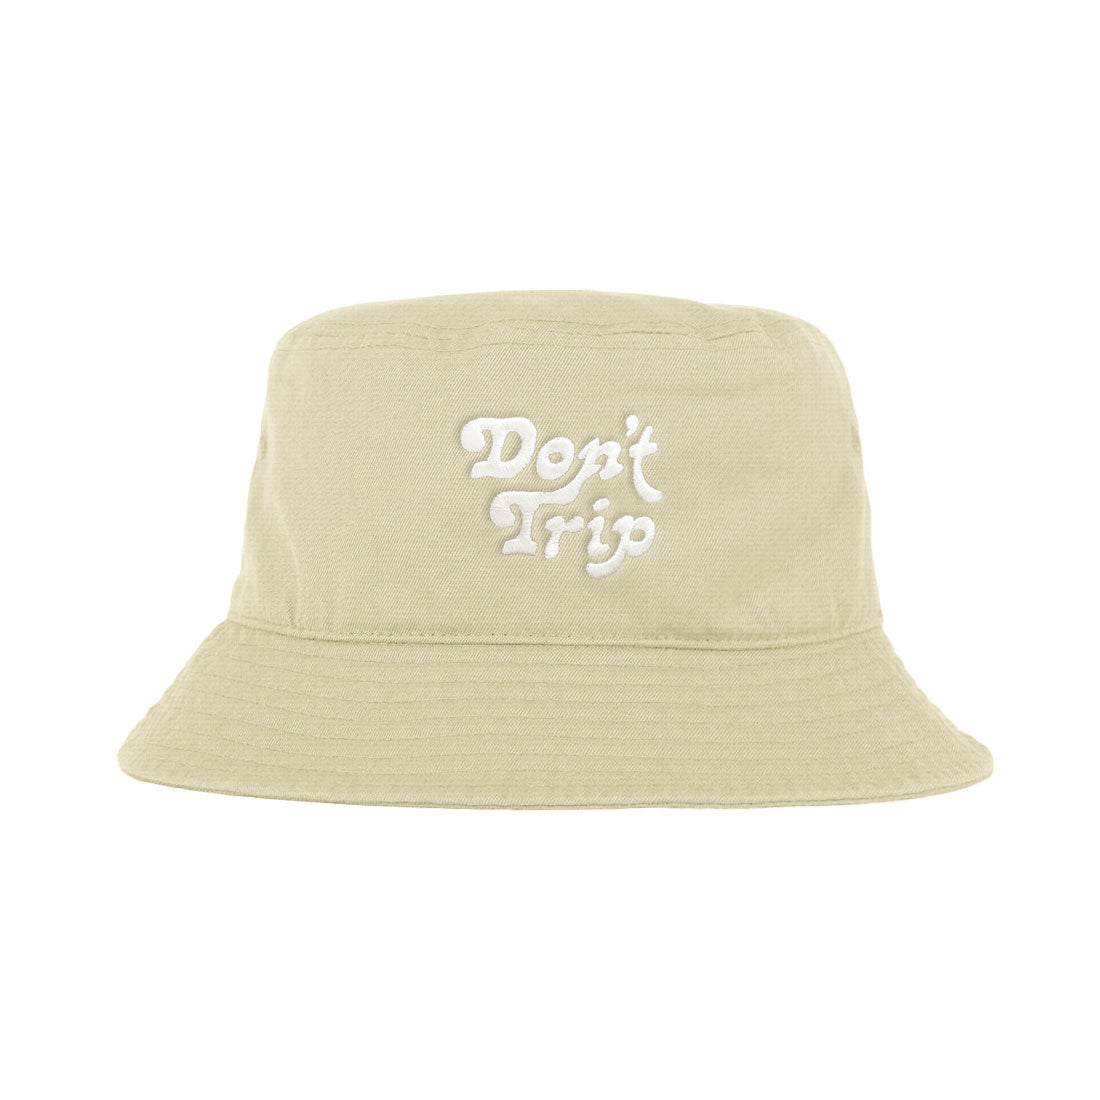 Free & Easy Don't Trip Canvas Bucket Hat in cream with white Don't Trip embroidery on a white background - Free & Easy